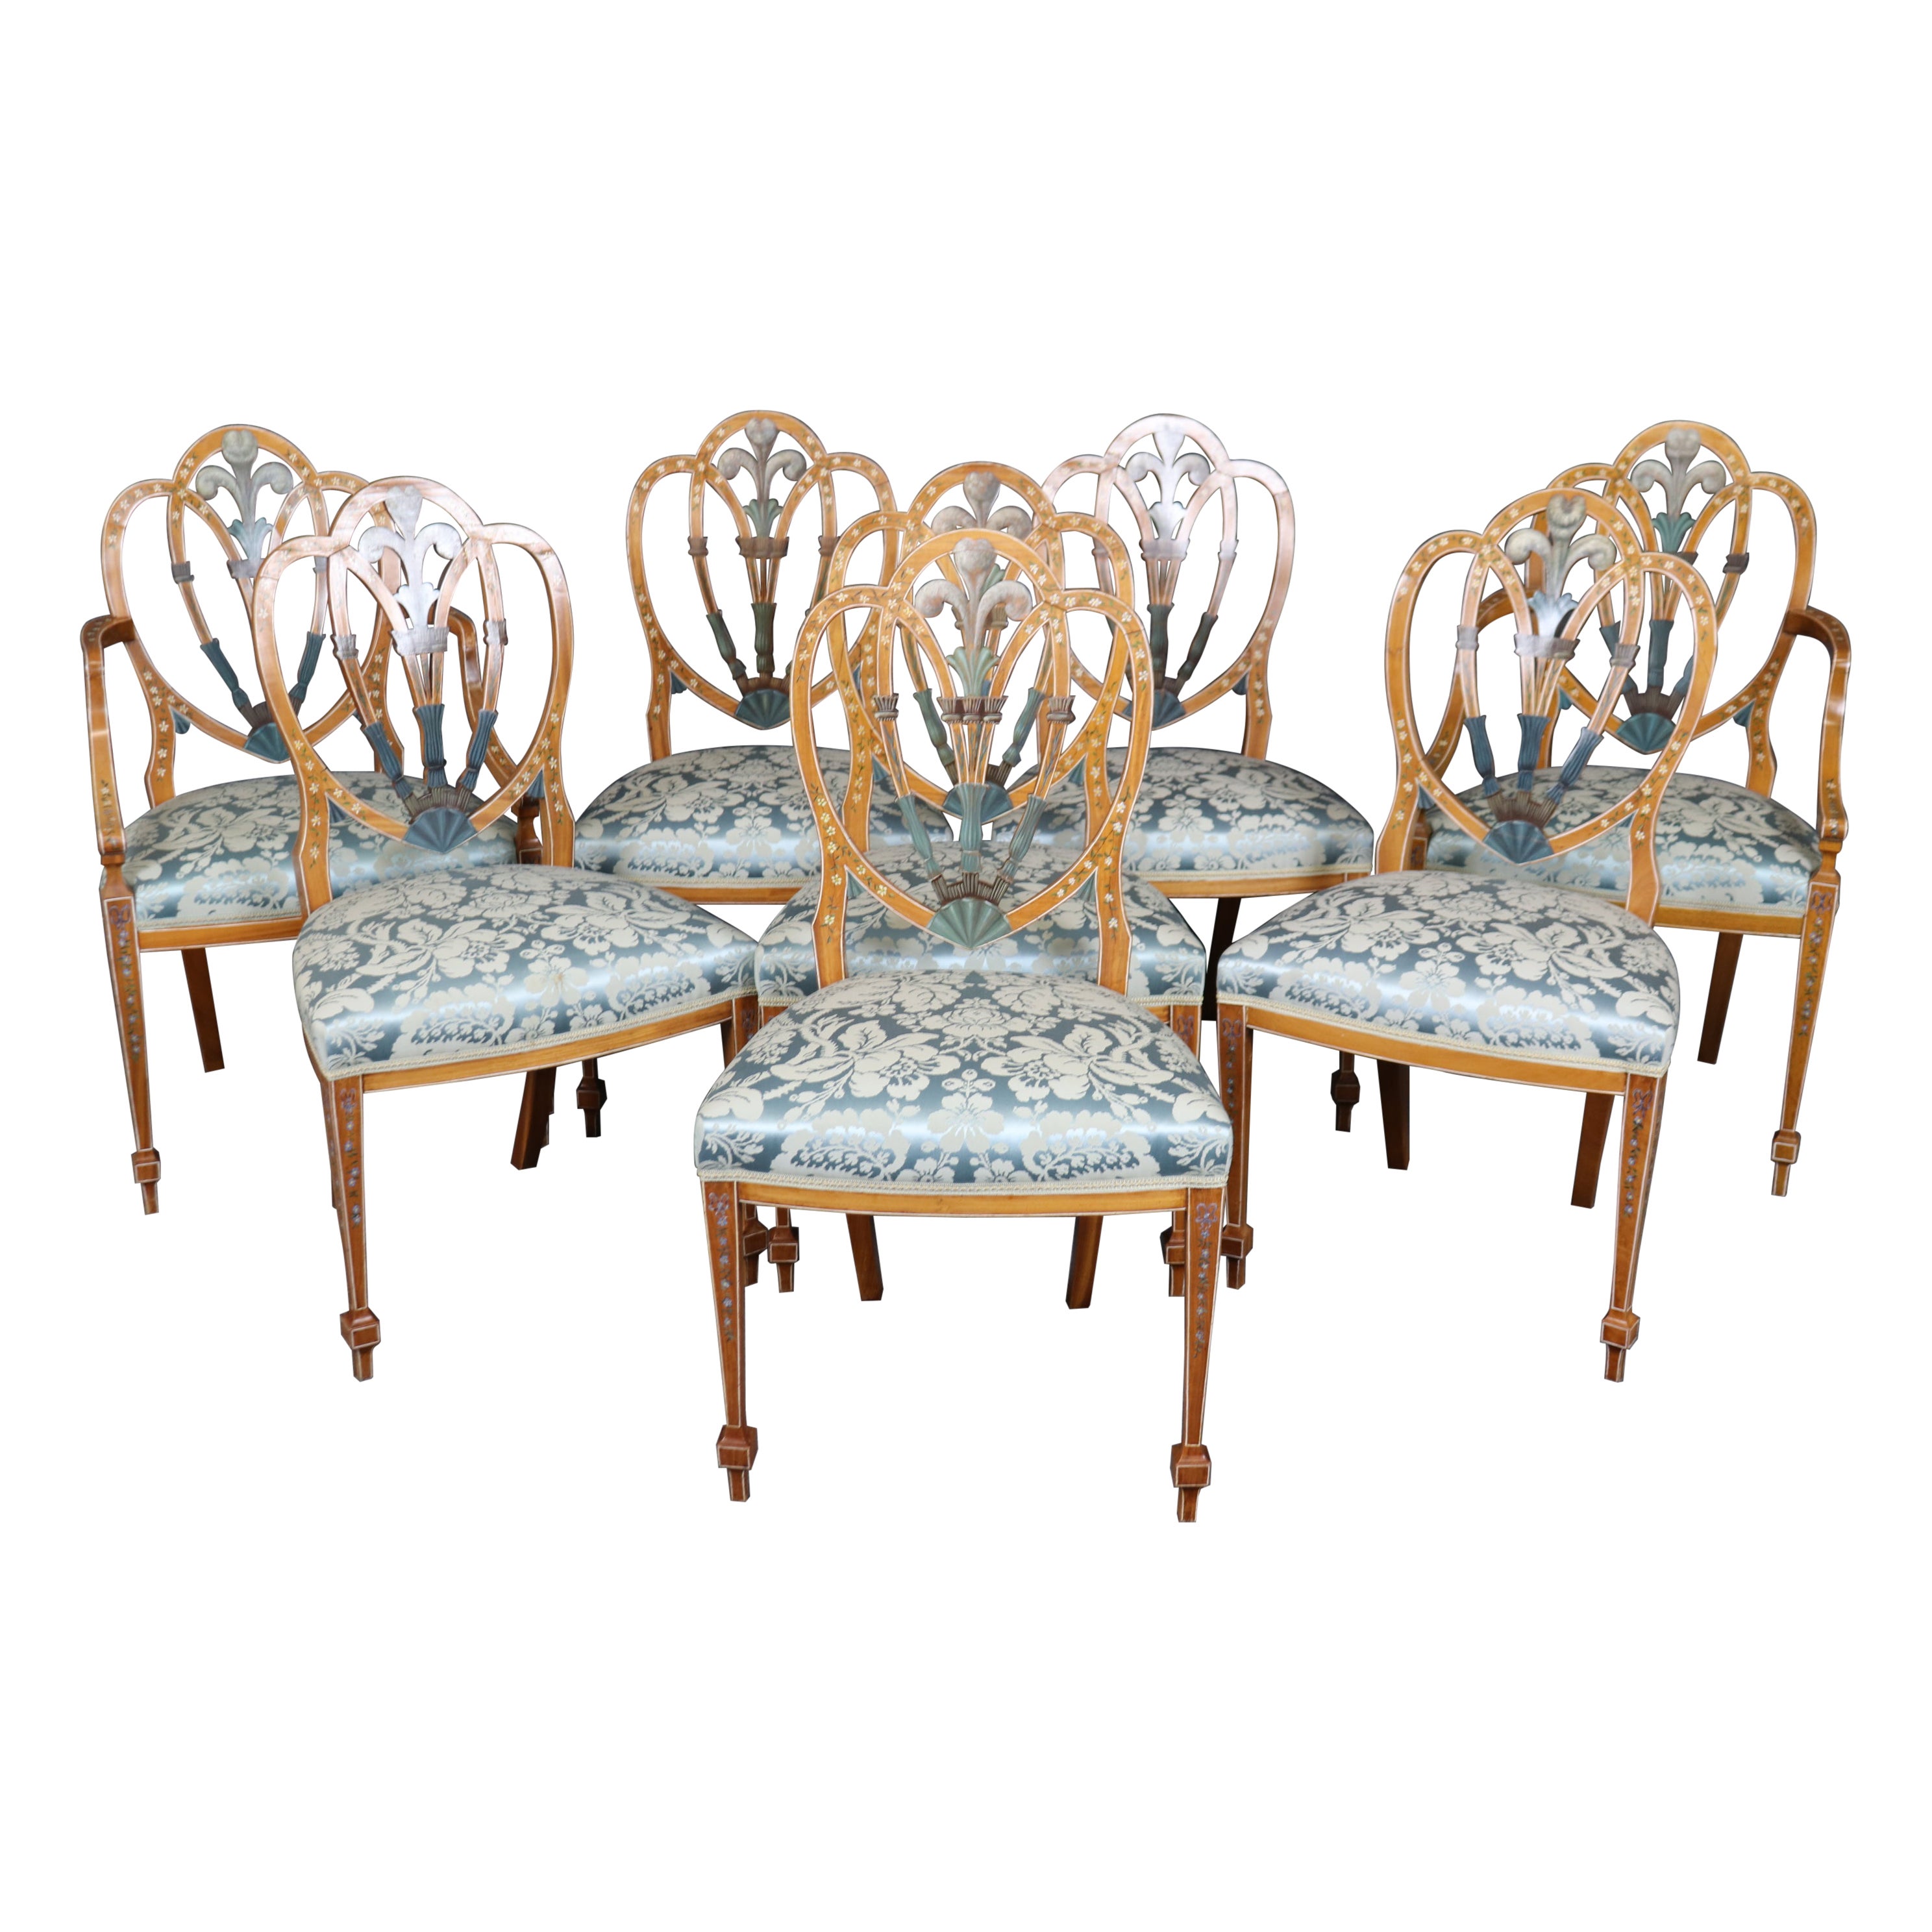 Fantastic set of 8 Antique Adams Paint Decorated Satinwood Dining Chairs 